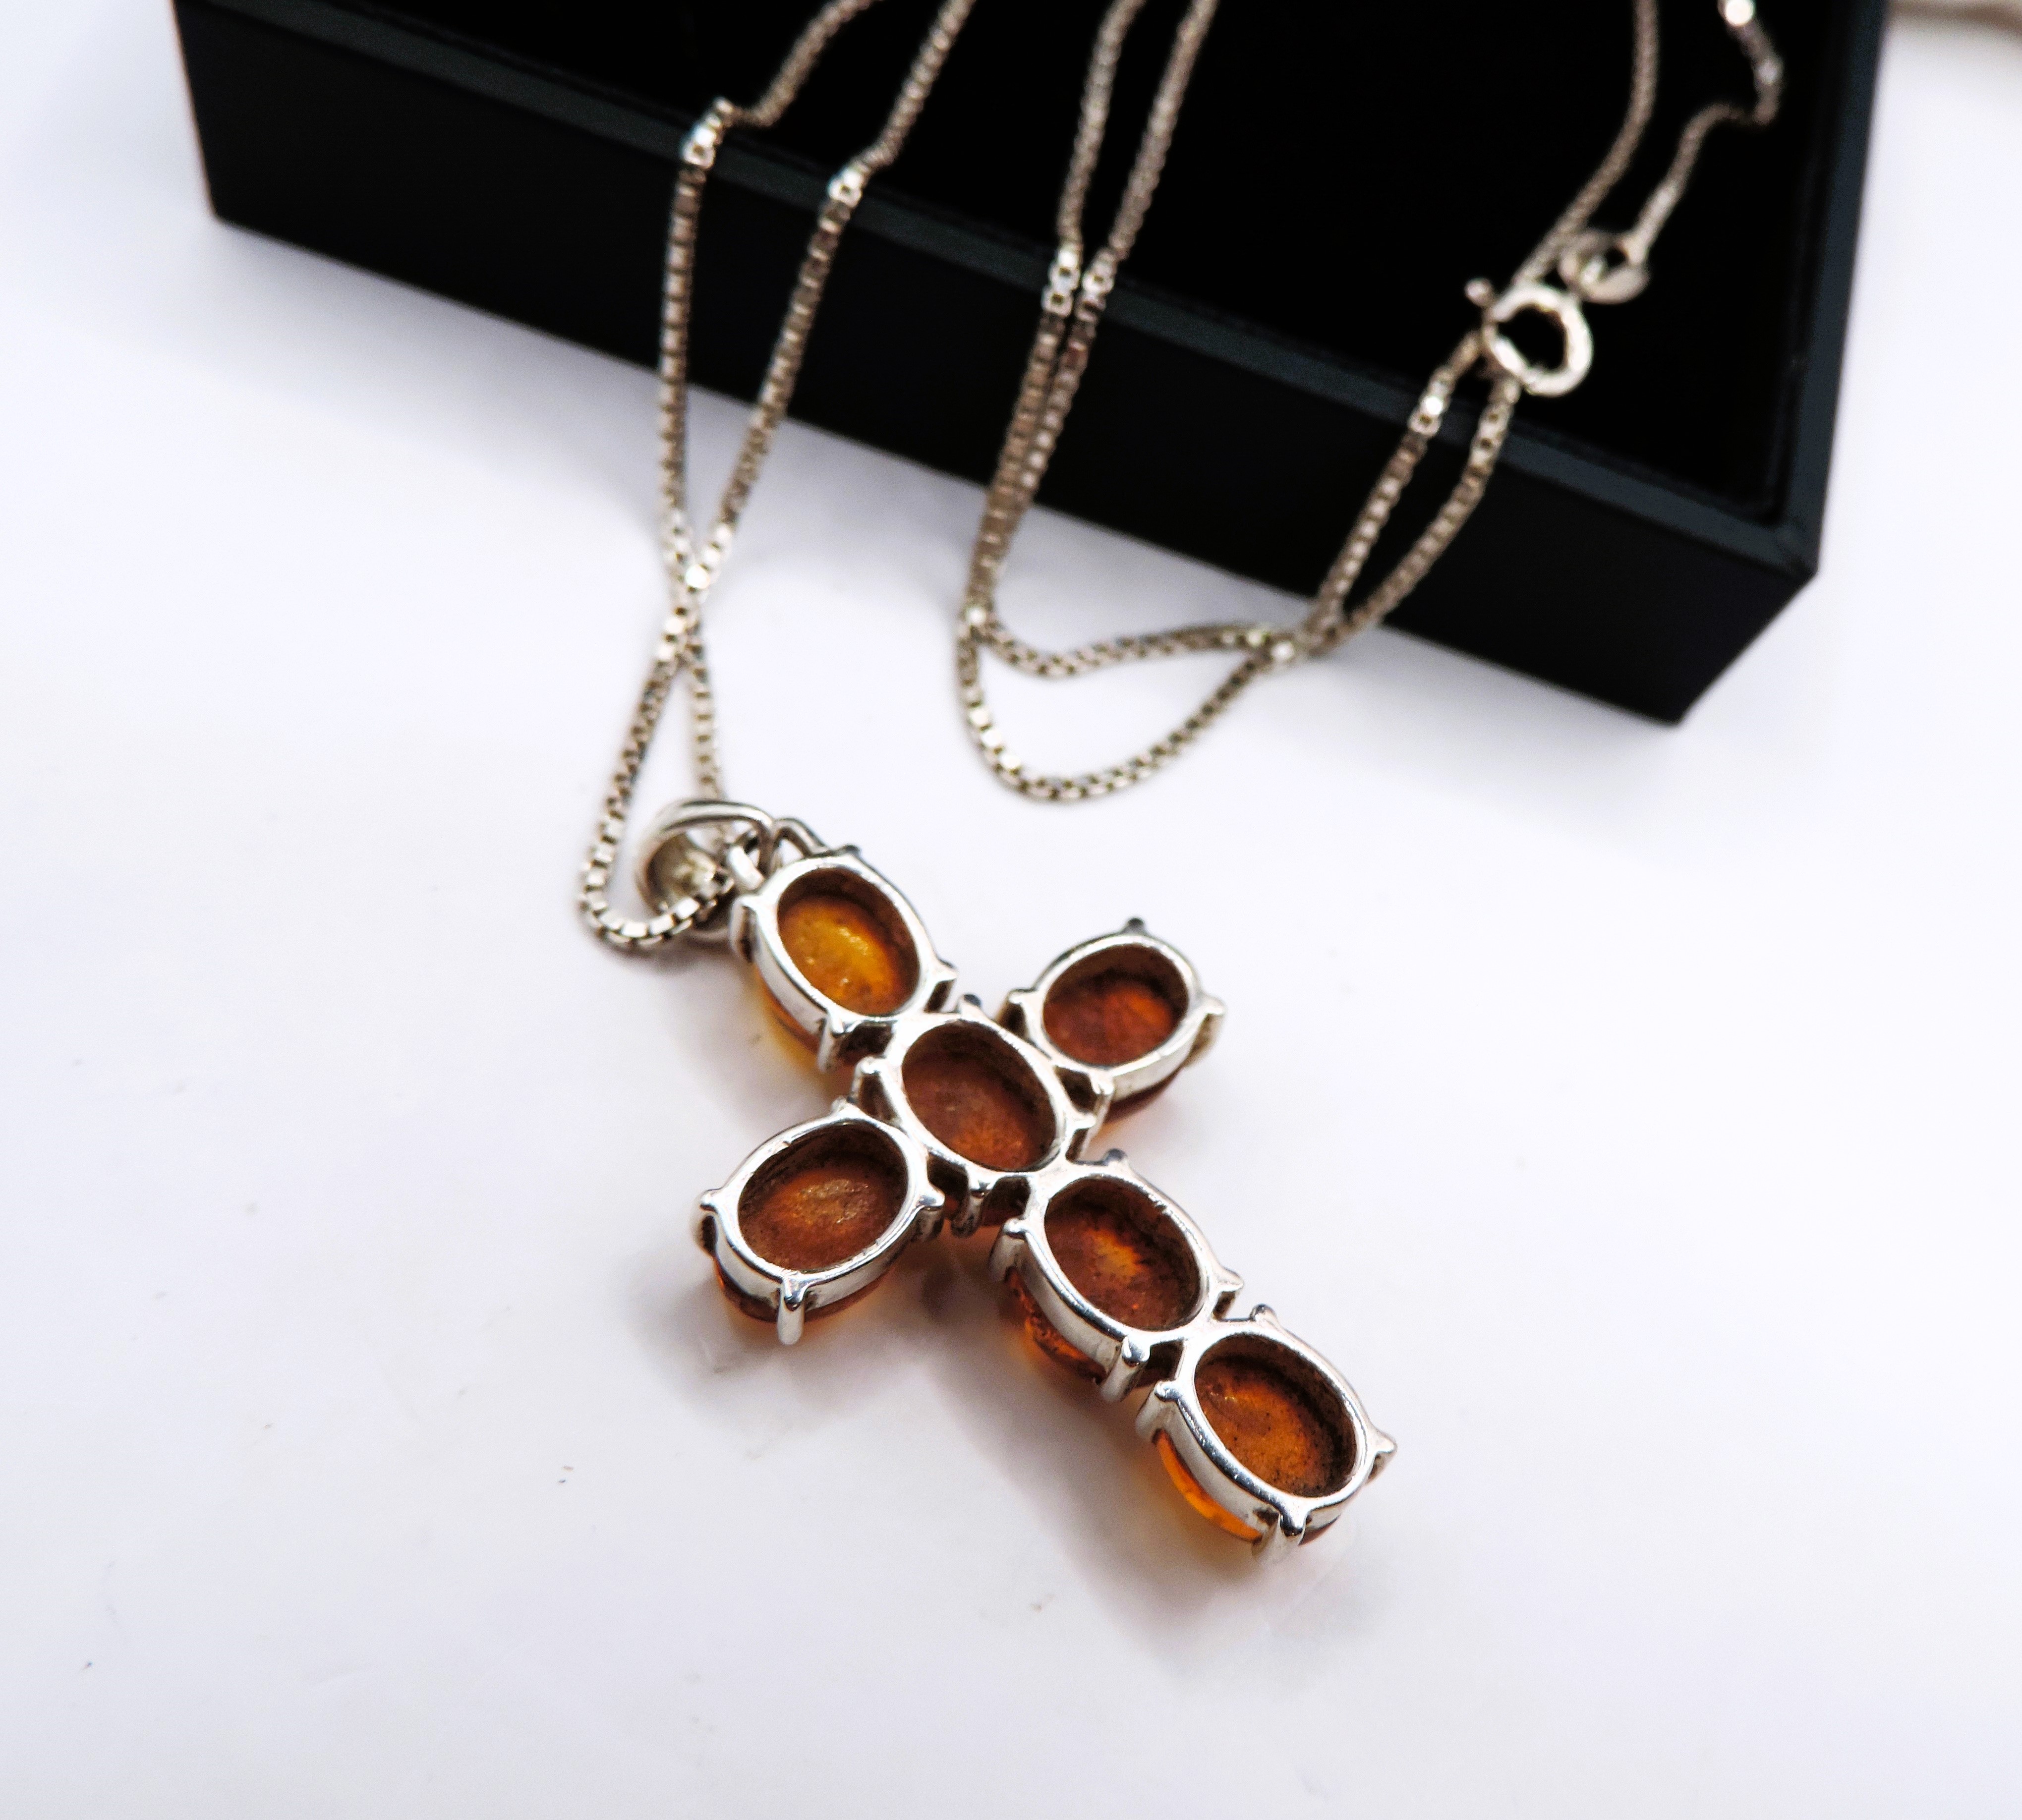 Vintage Sterling Silver Cabochon Baltic Amber Cross Necklace - Image 3 of 3